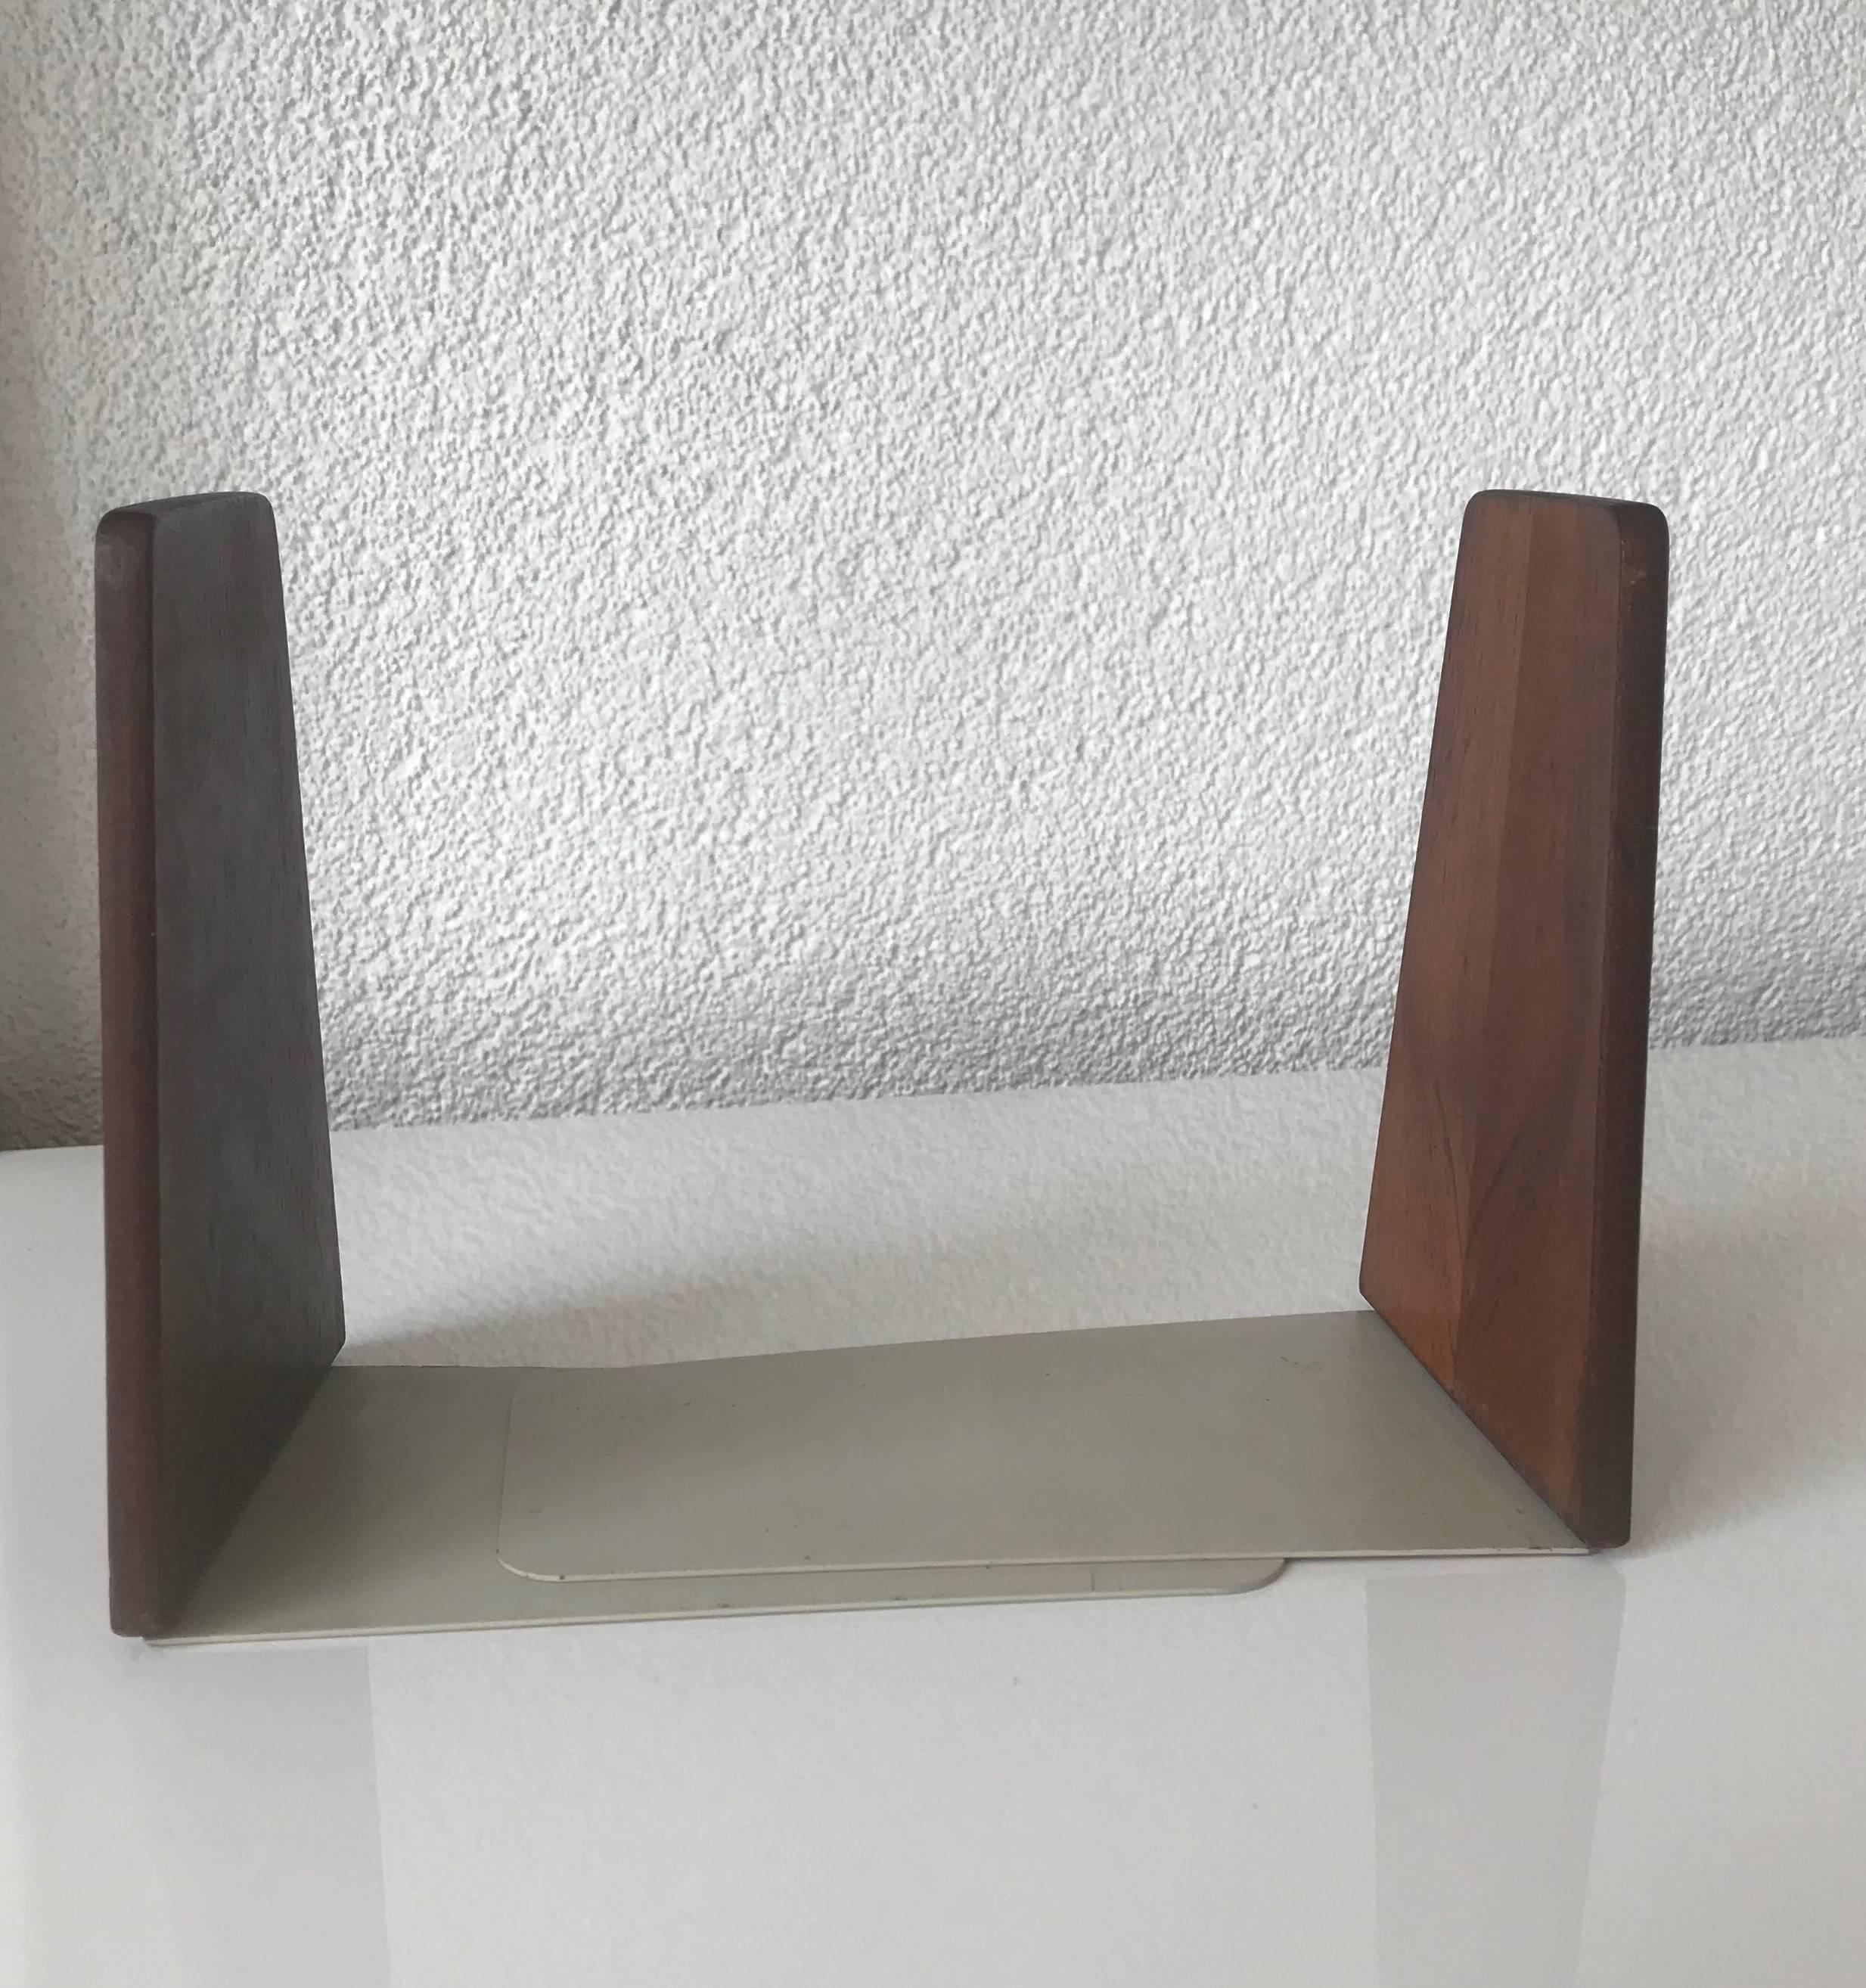 Hand-Crafted Beautiful Pair of Danish Design Mid-Century Modern Two-tone Wood, Metal Bookends